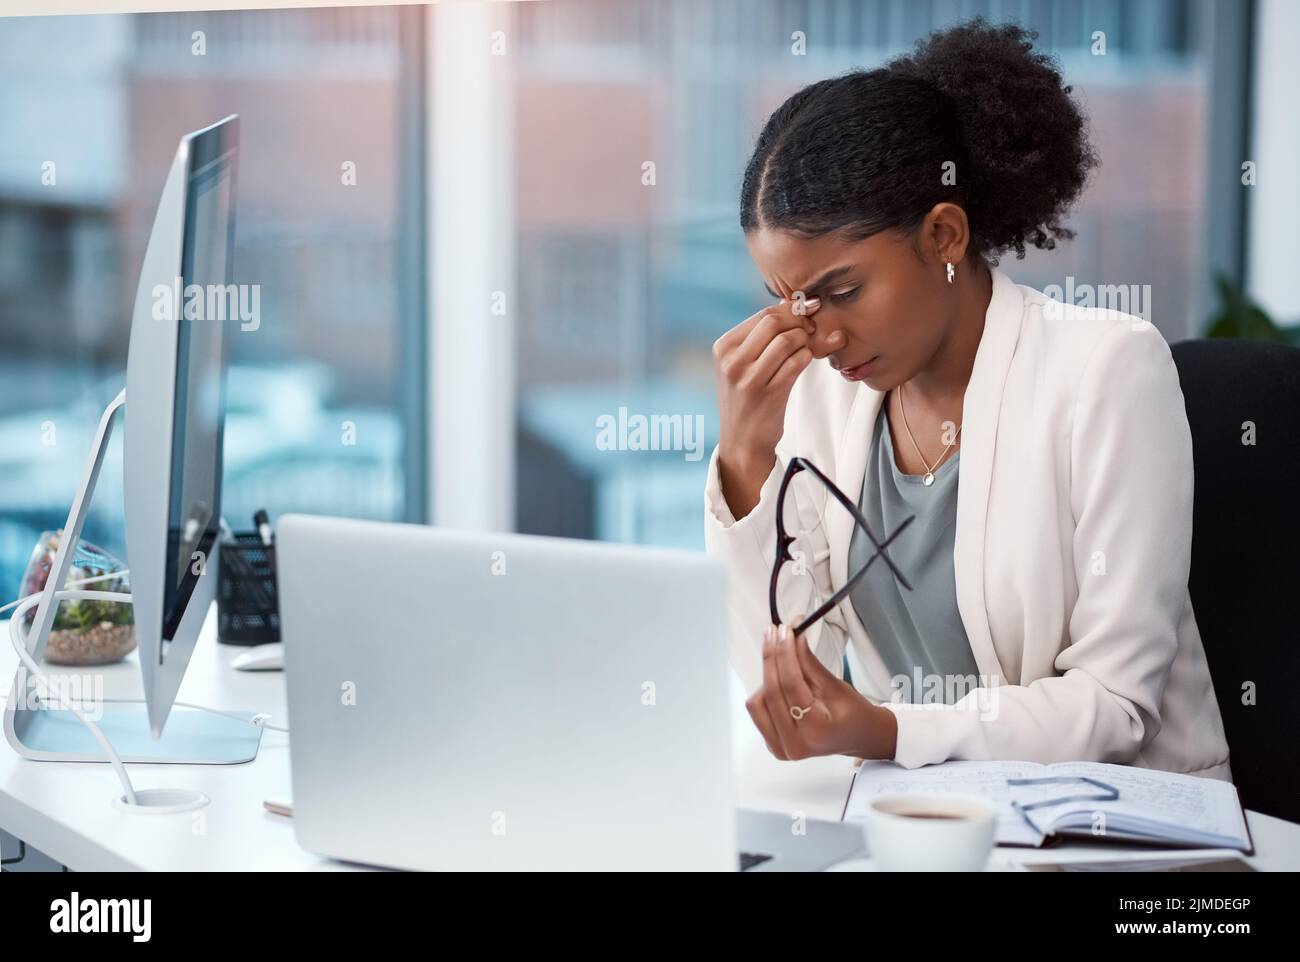 Female intern suffering from a headache or migraine due to stress caused by deadlines and work pressures. Professional in pain feeling bad, stressed Stock Photo